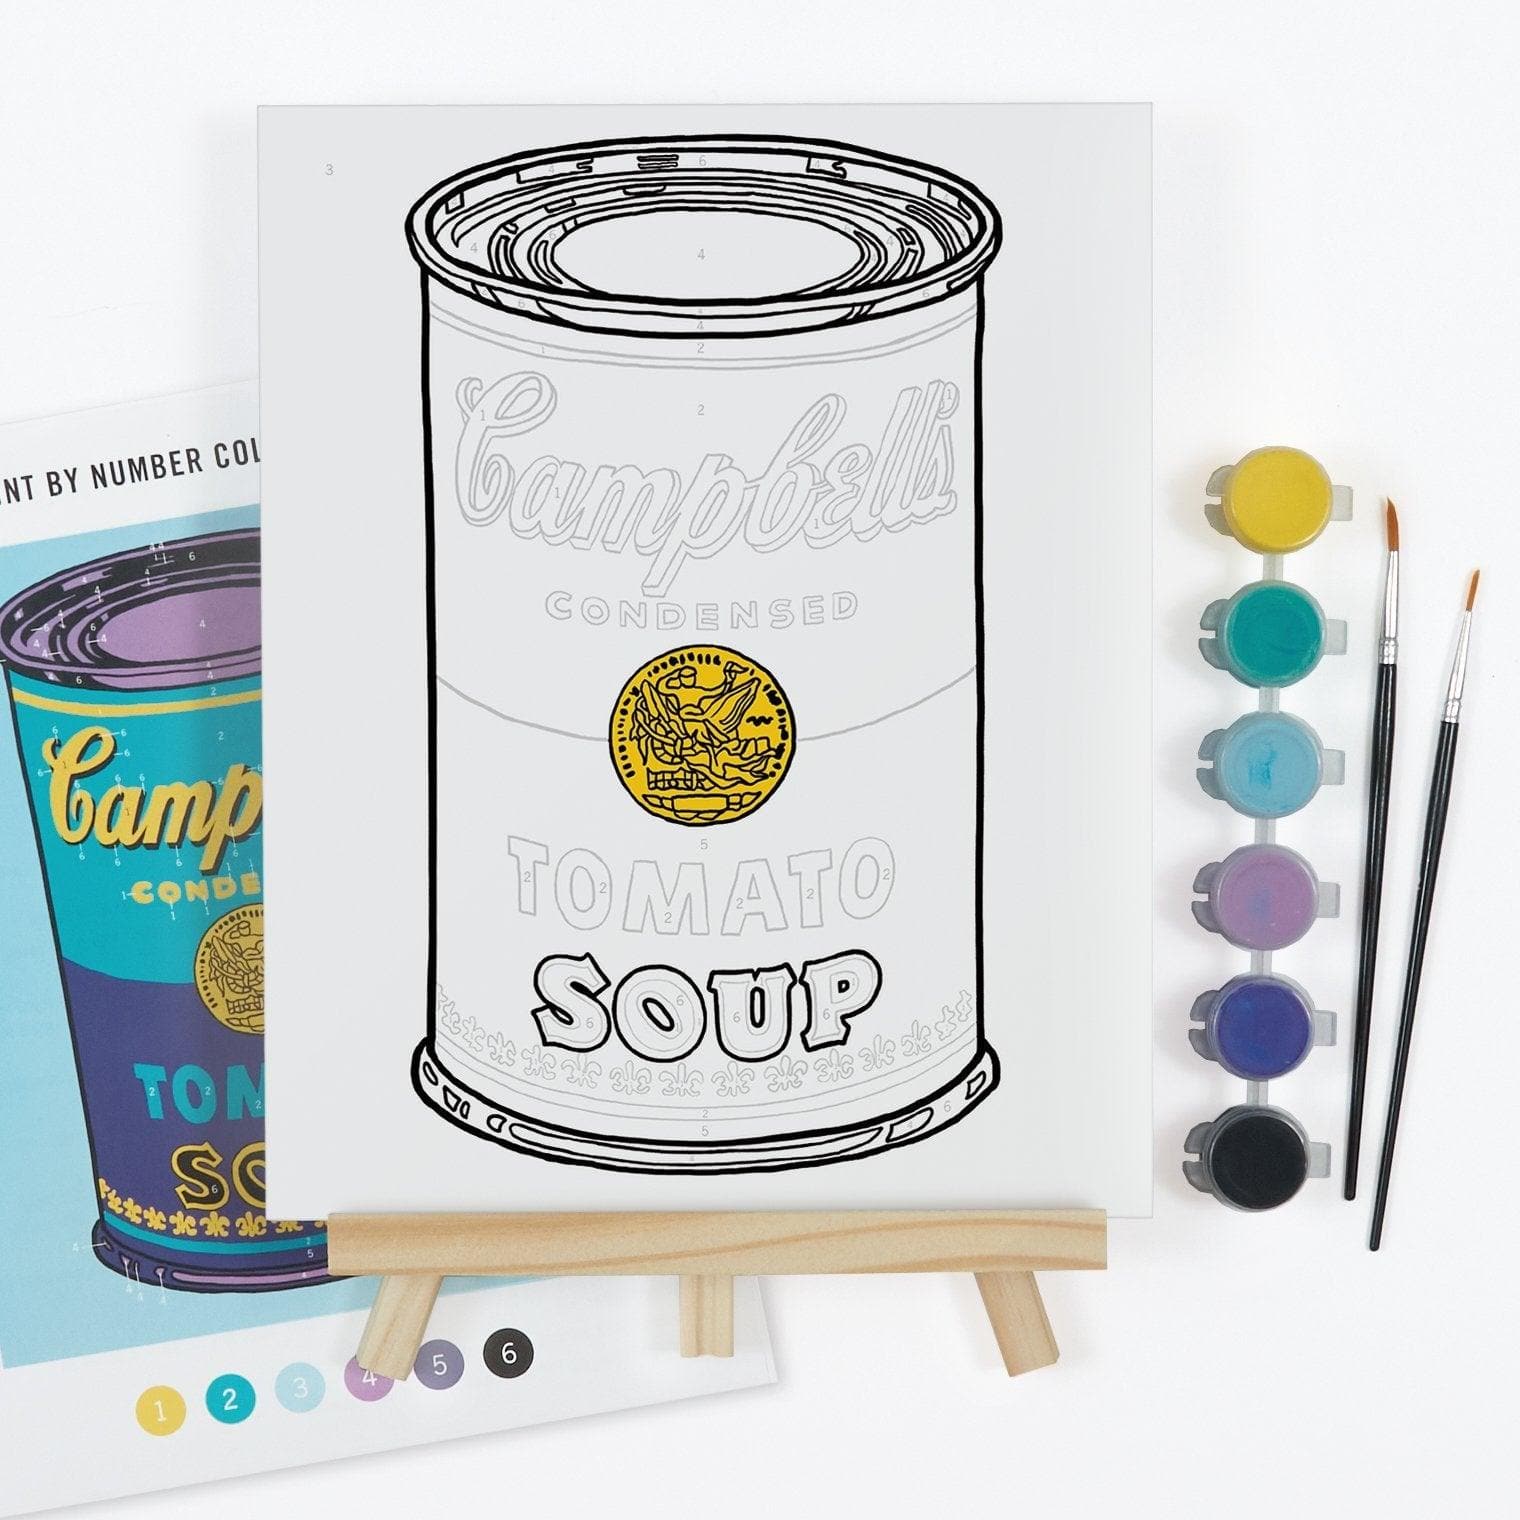 Andy Warhol Soup Can Paint By Number Kit Andy Warhol Soup Can Paint By Number Kit Andy Warhol Soup Can Paint By Number Kit 